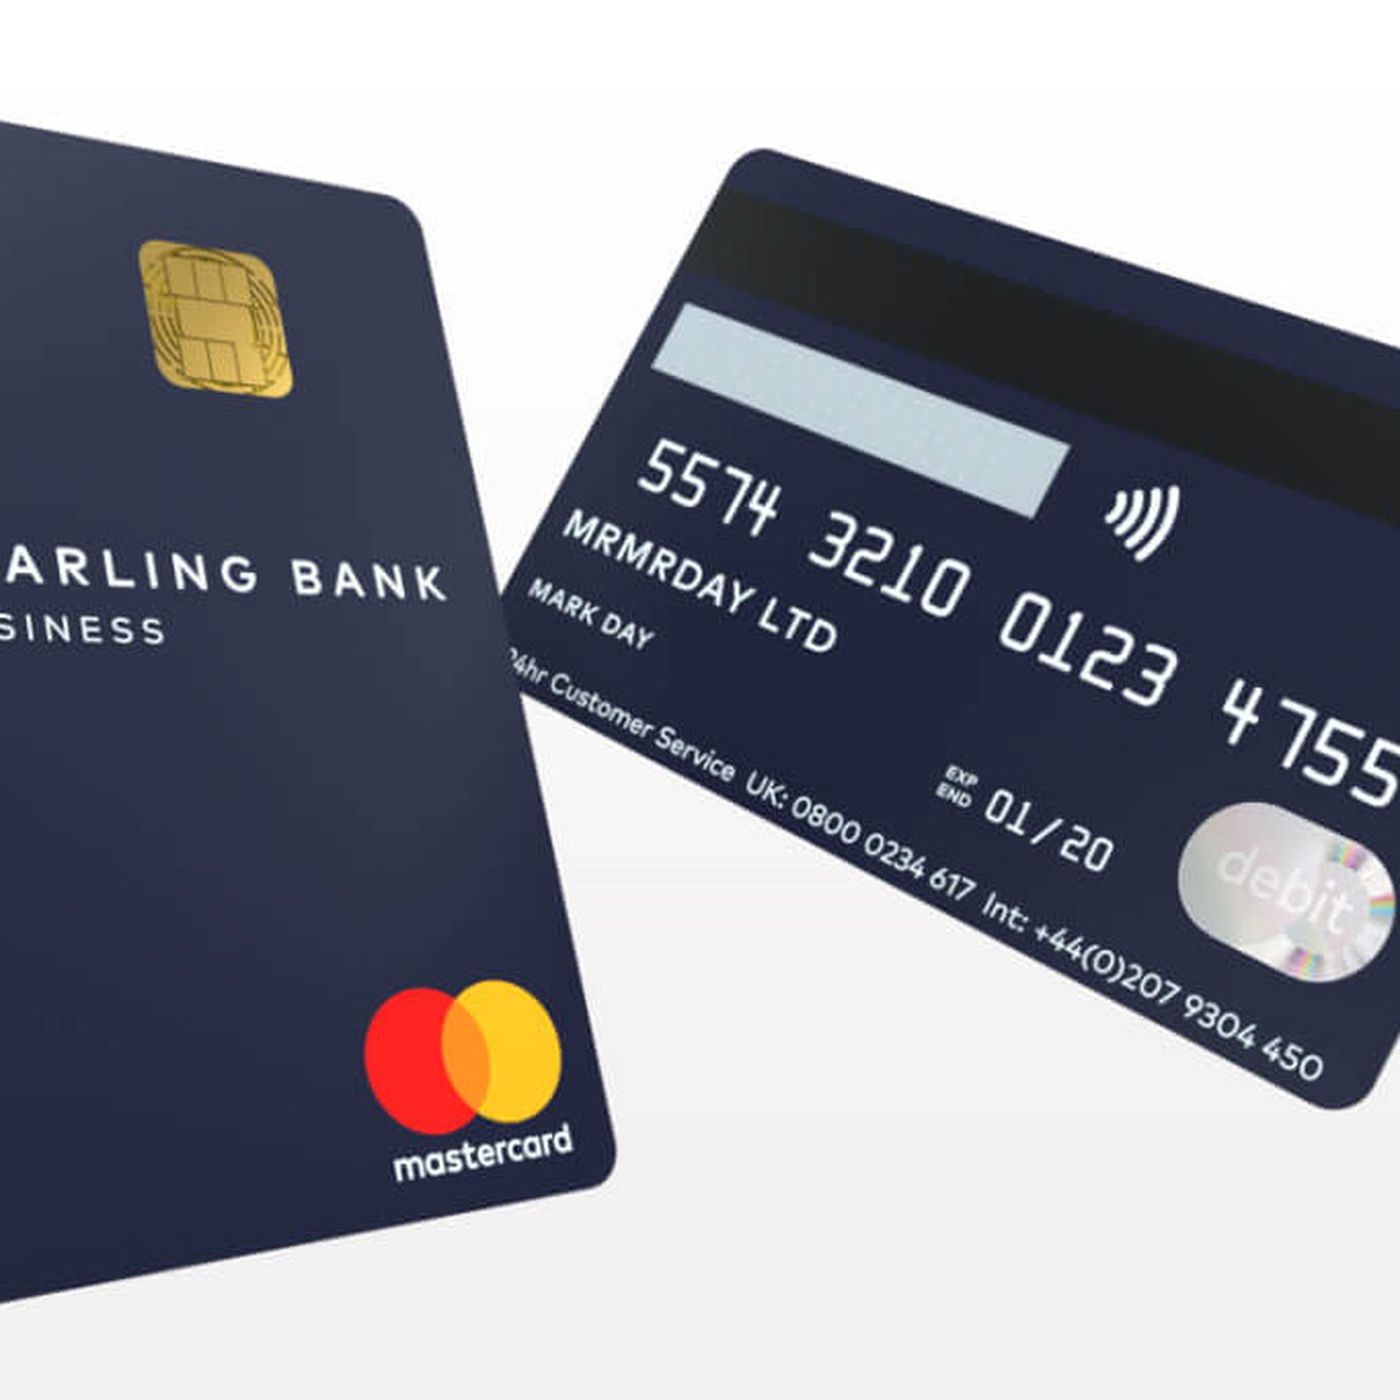 Portrait Bank Cards Are A Thing Now The Verge